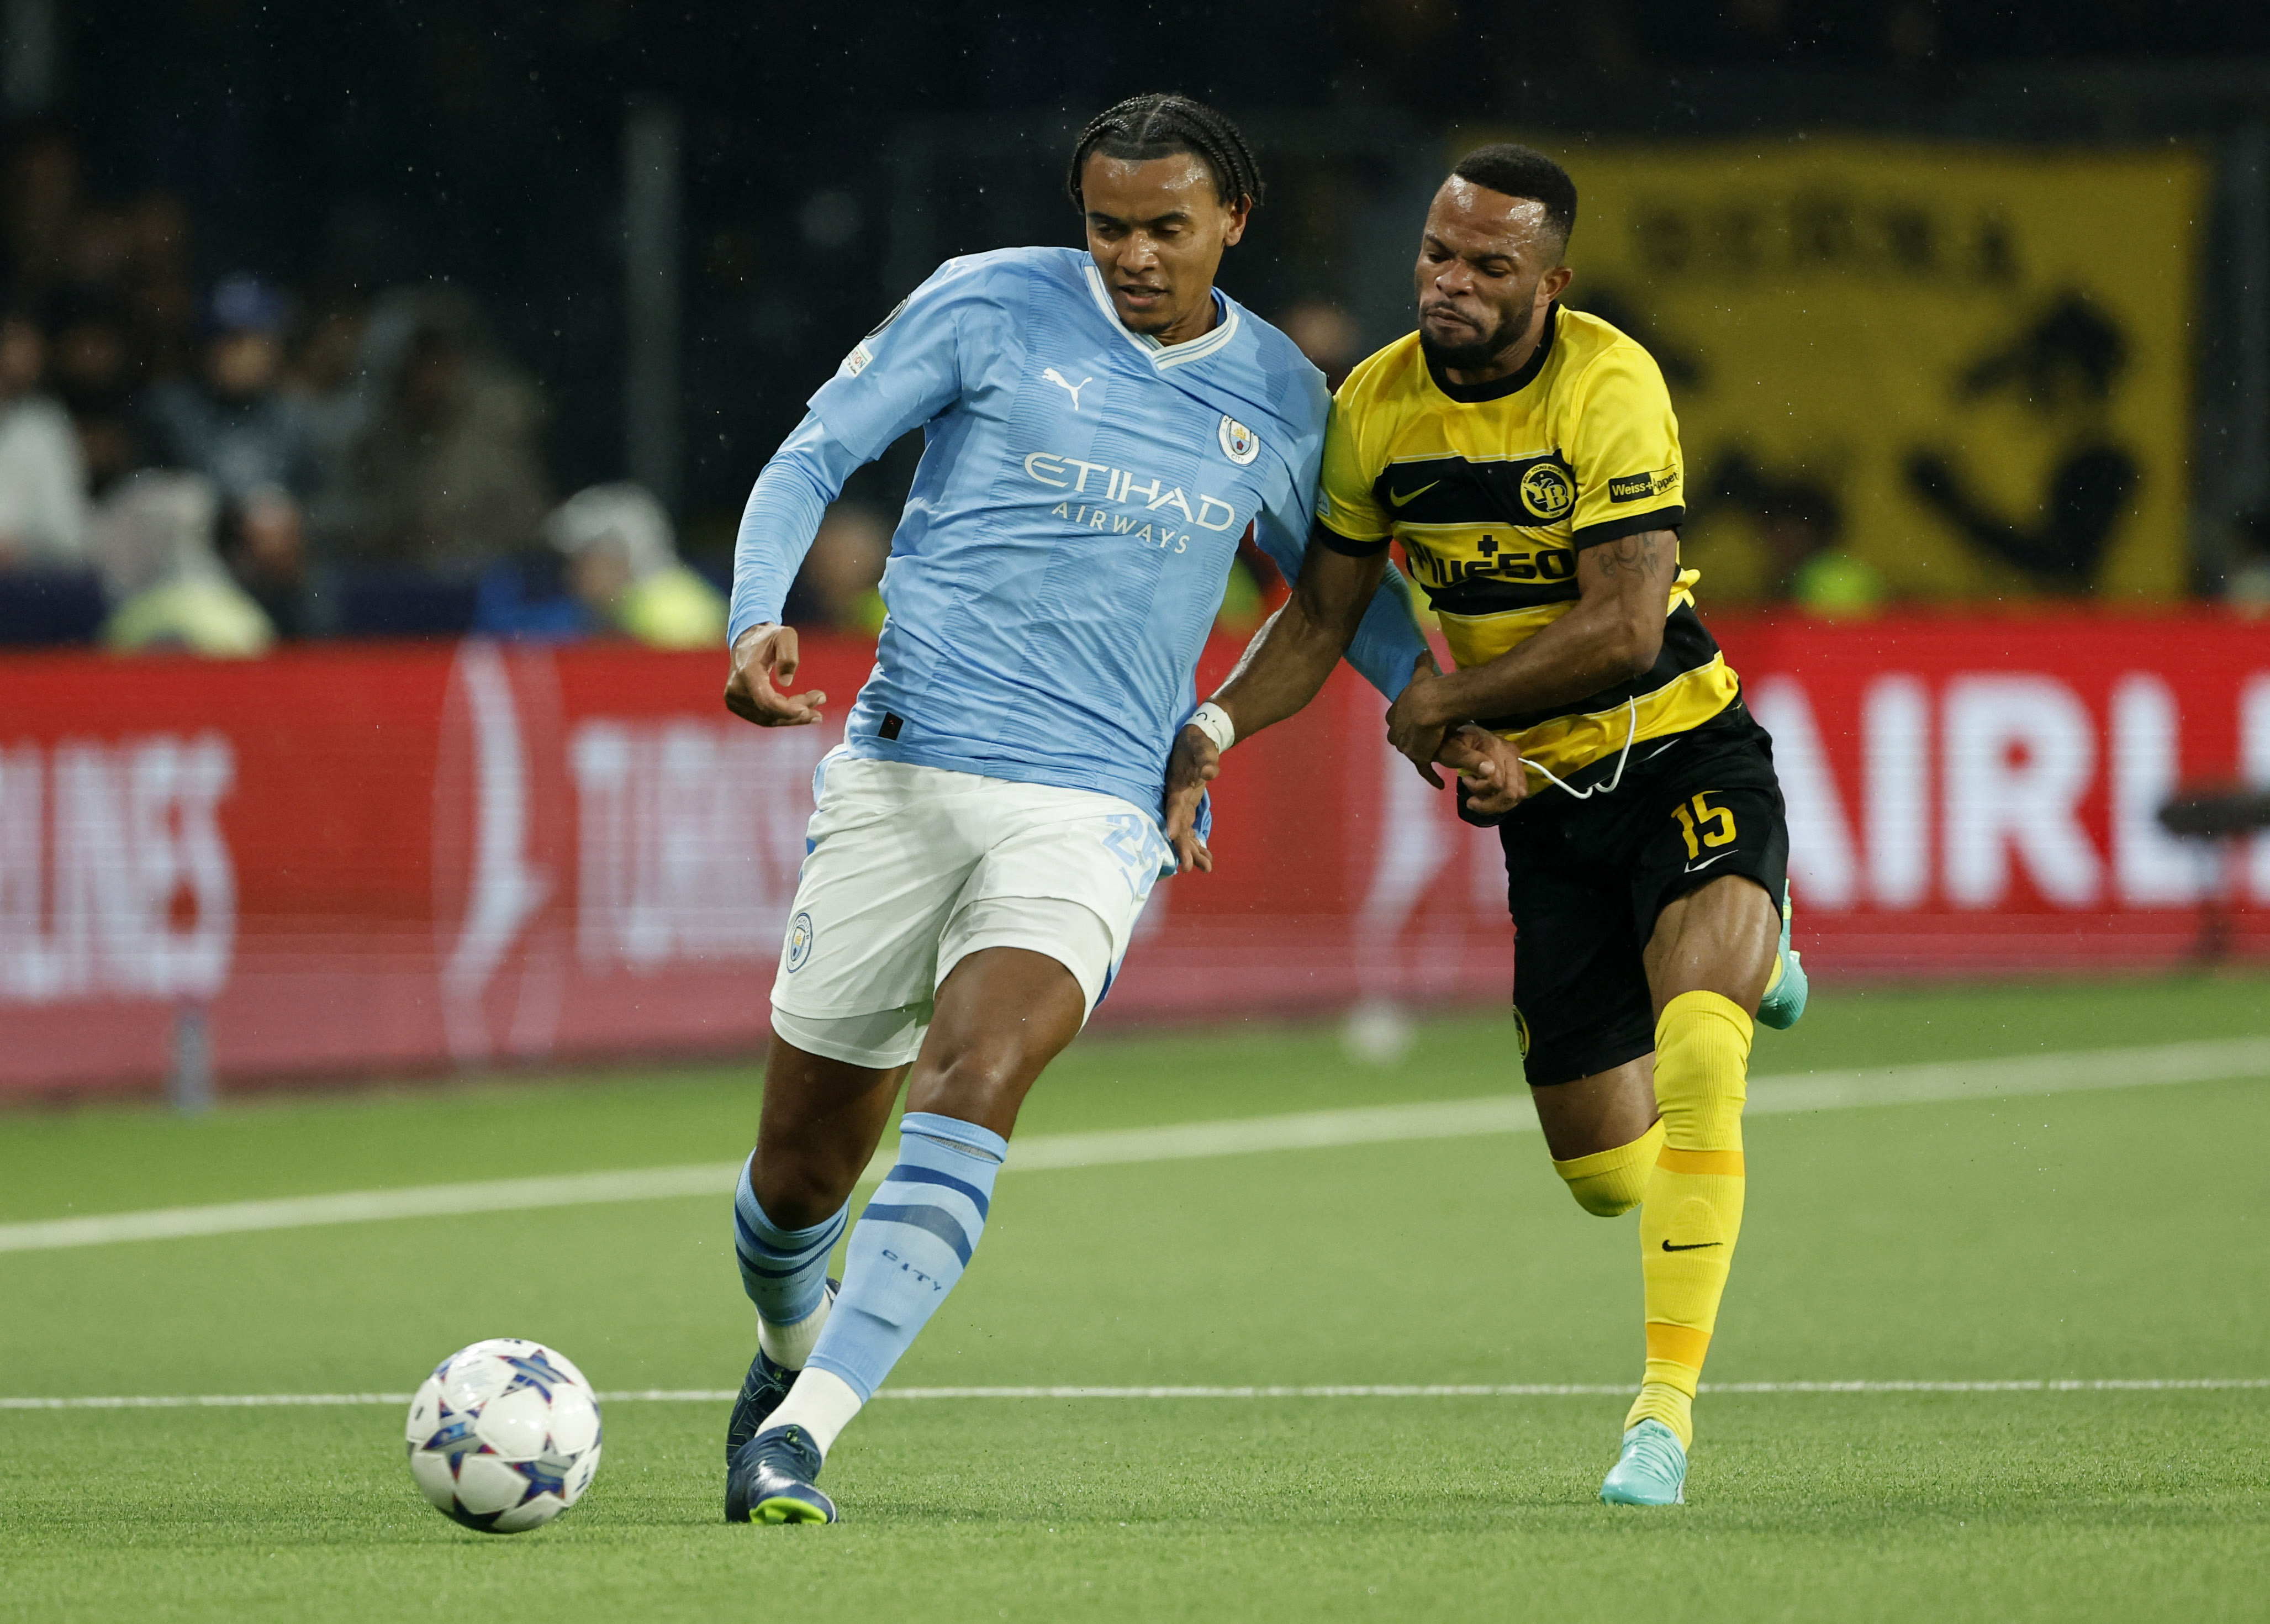 Haaland brace lifts Man City to 3-1 win over Young Boys